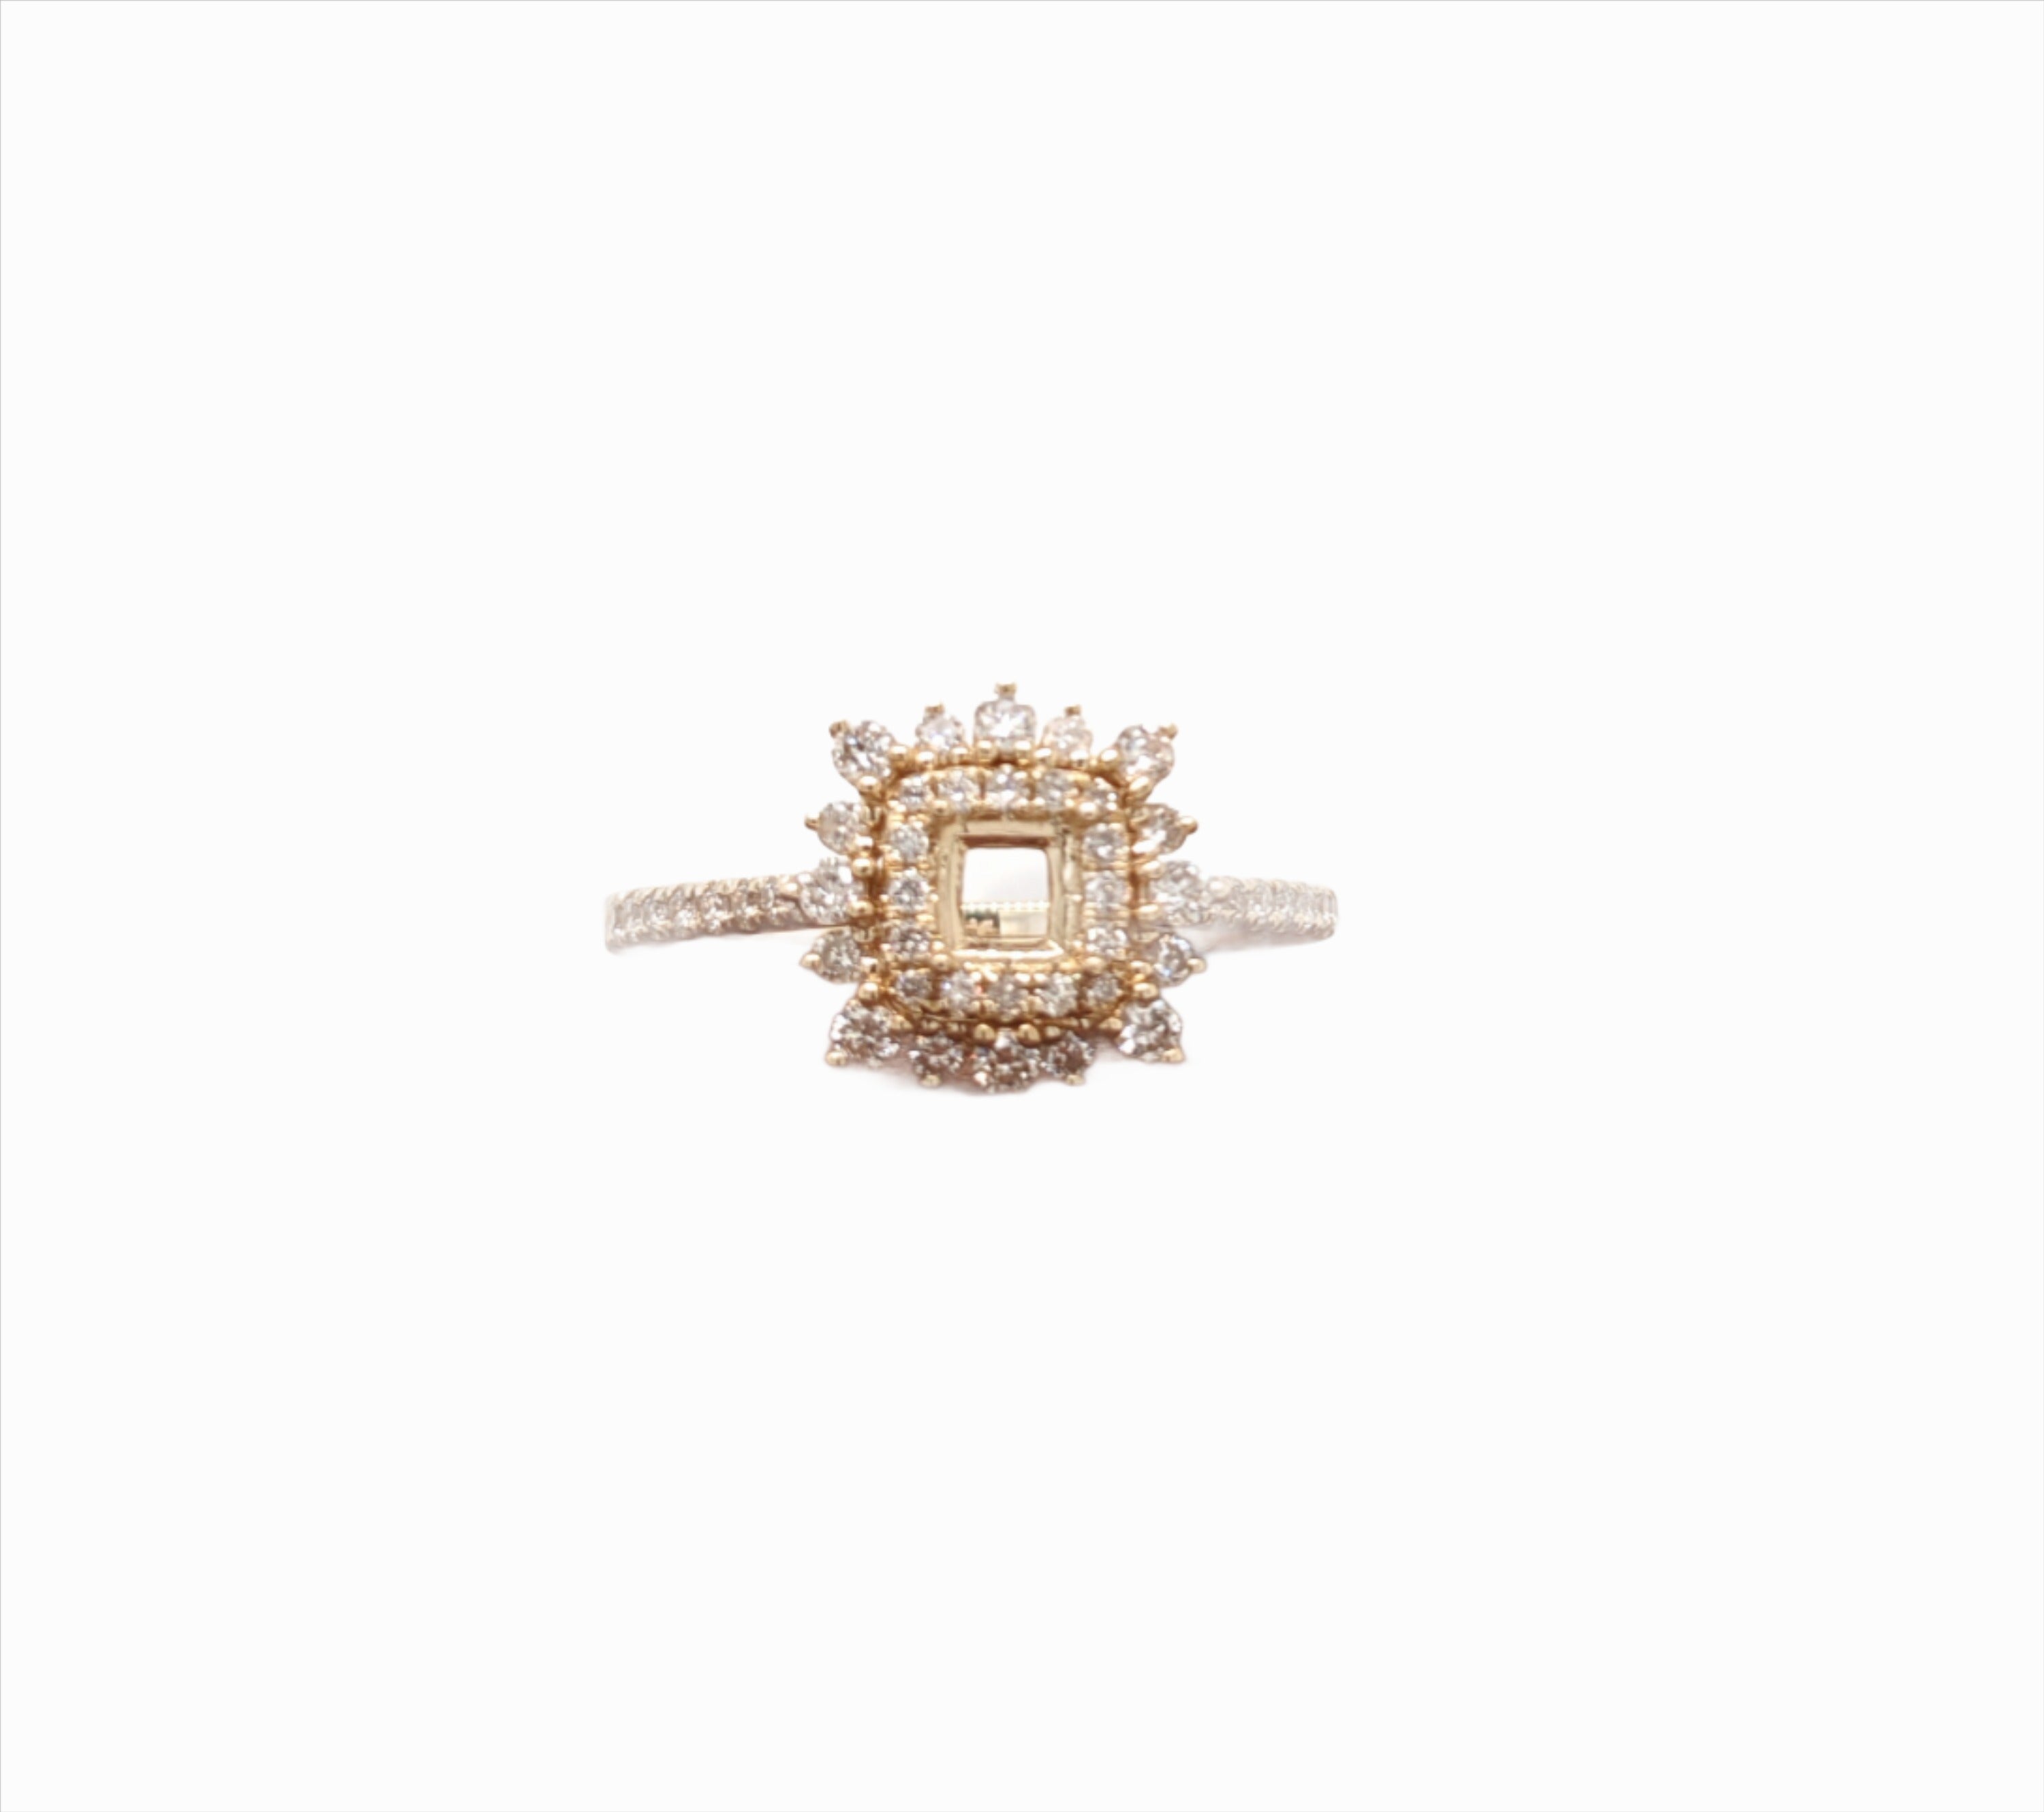 Cushion Double Diamond Halo Ring Semi Mount in 14K Gold | Square 4mm | Art Deco | Vintage Floral Design | Statement Ring | Custom Sizes